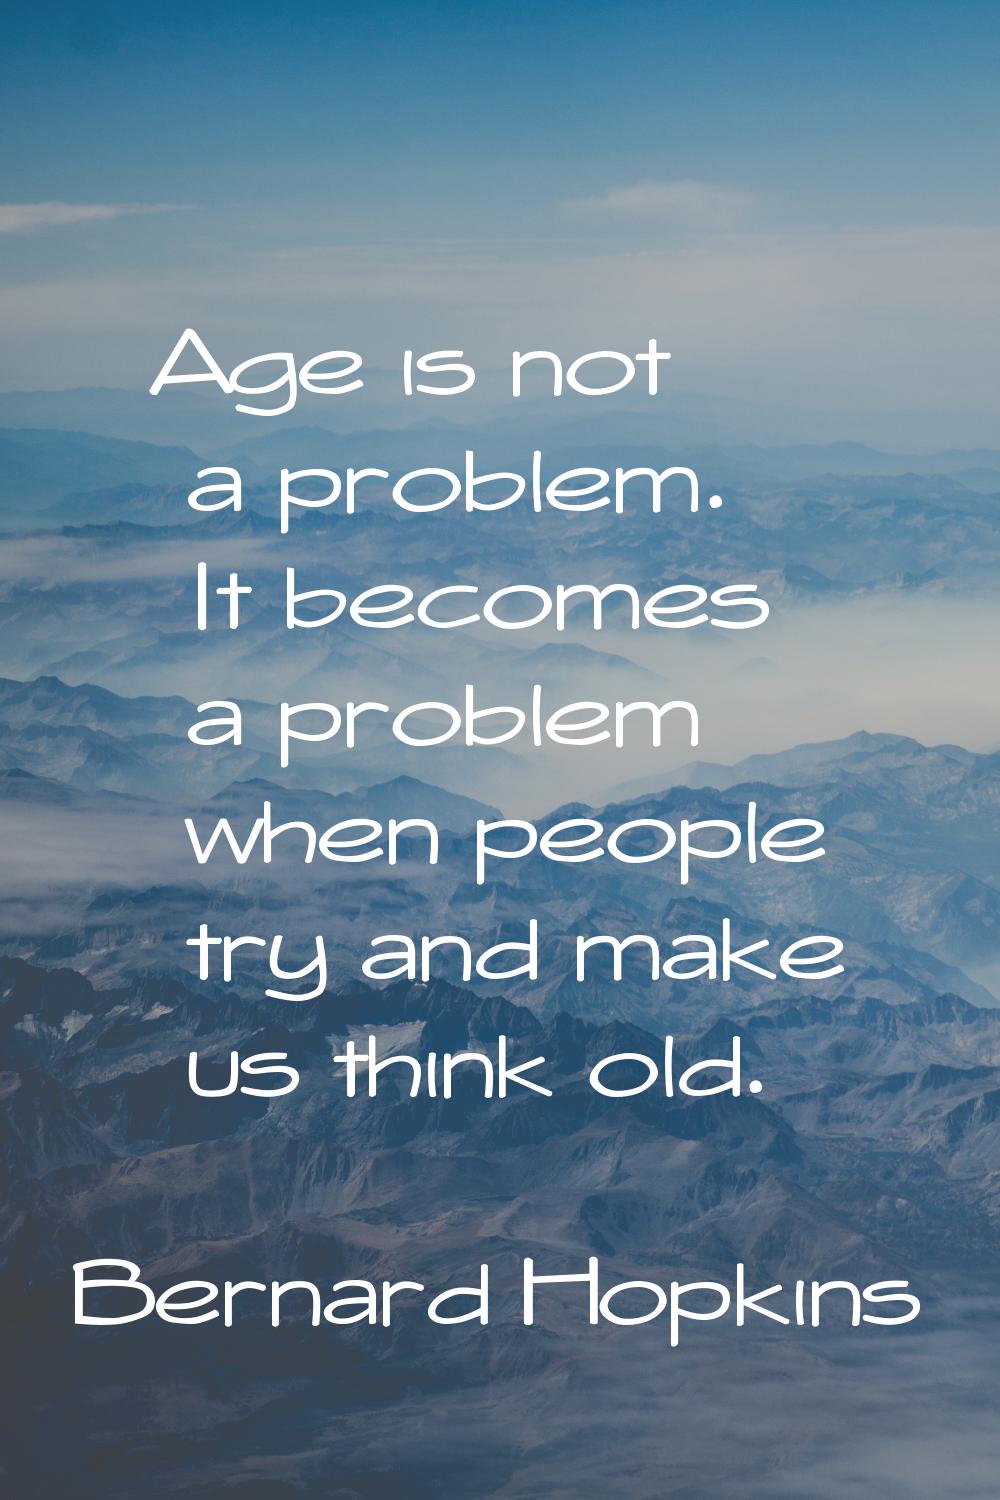 Age is not a problem. It becomes a problem when people try and make us think old.